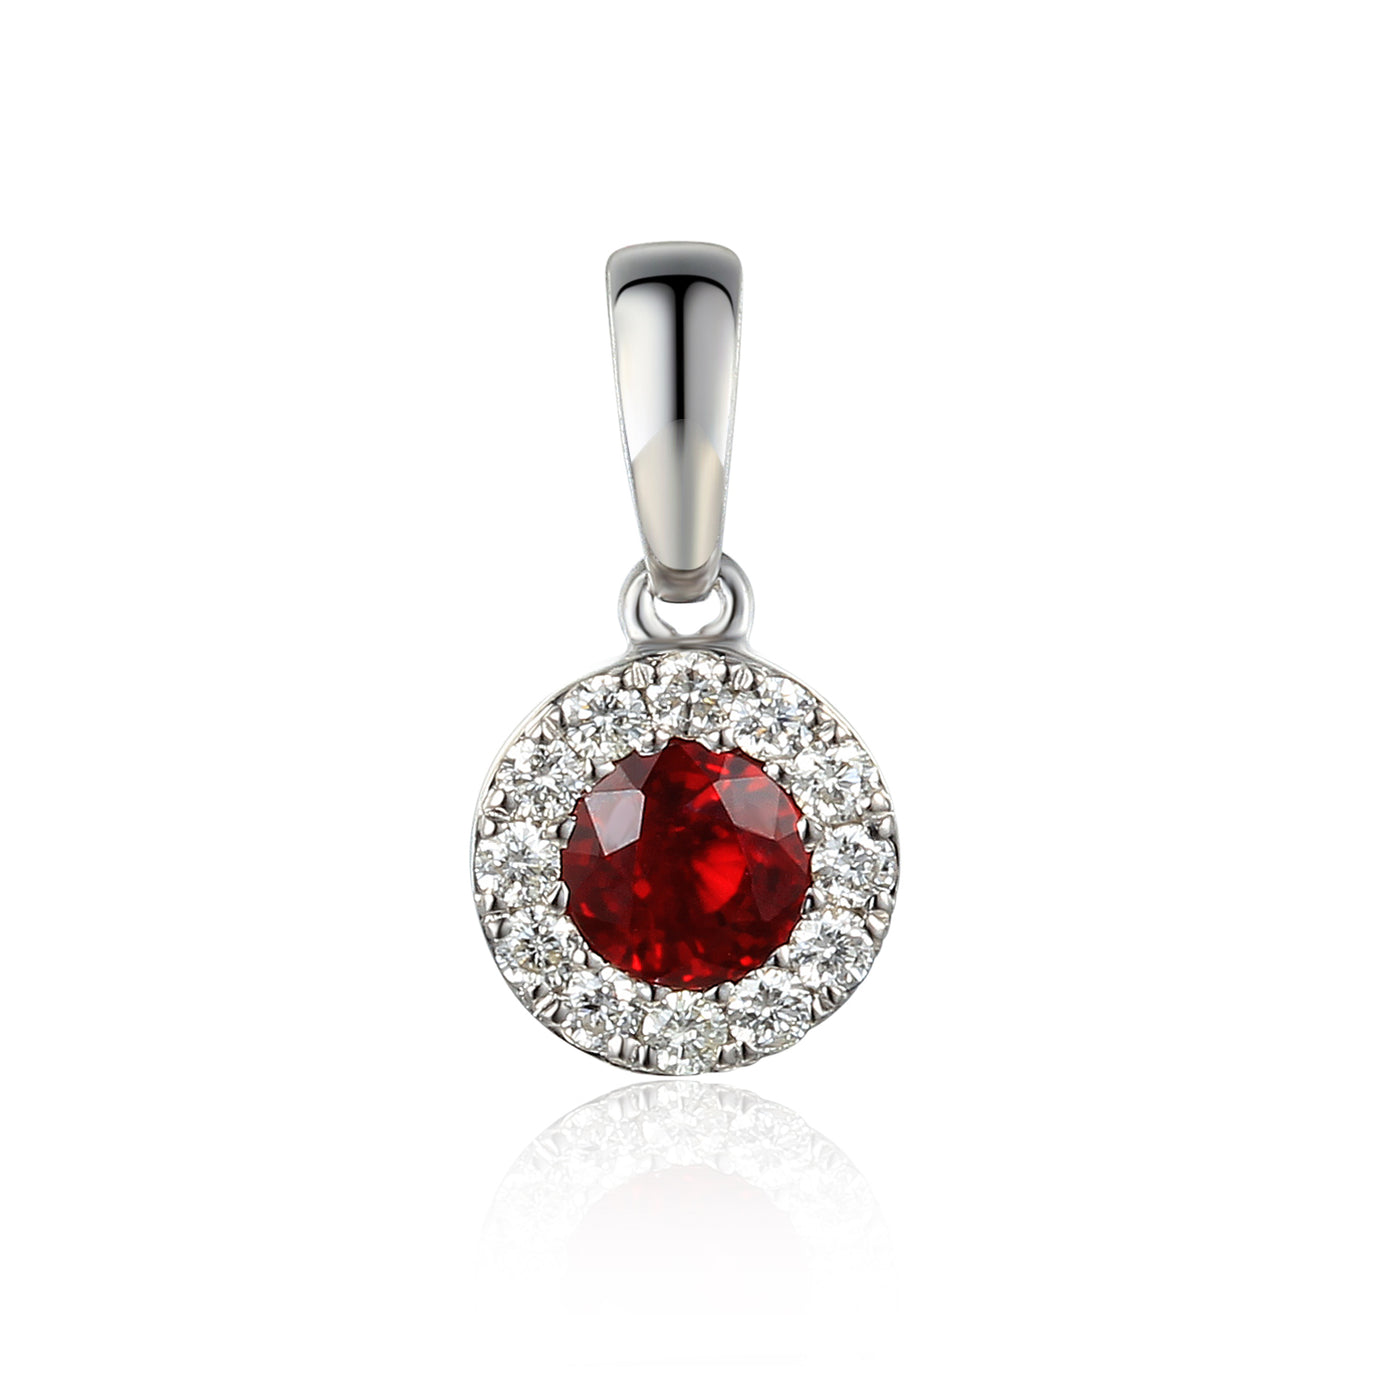 9ct White Gold Red Garnet and Diamond Cluster Birthstone Pendant with Chain